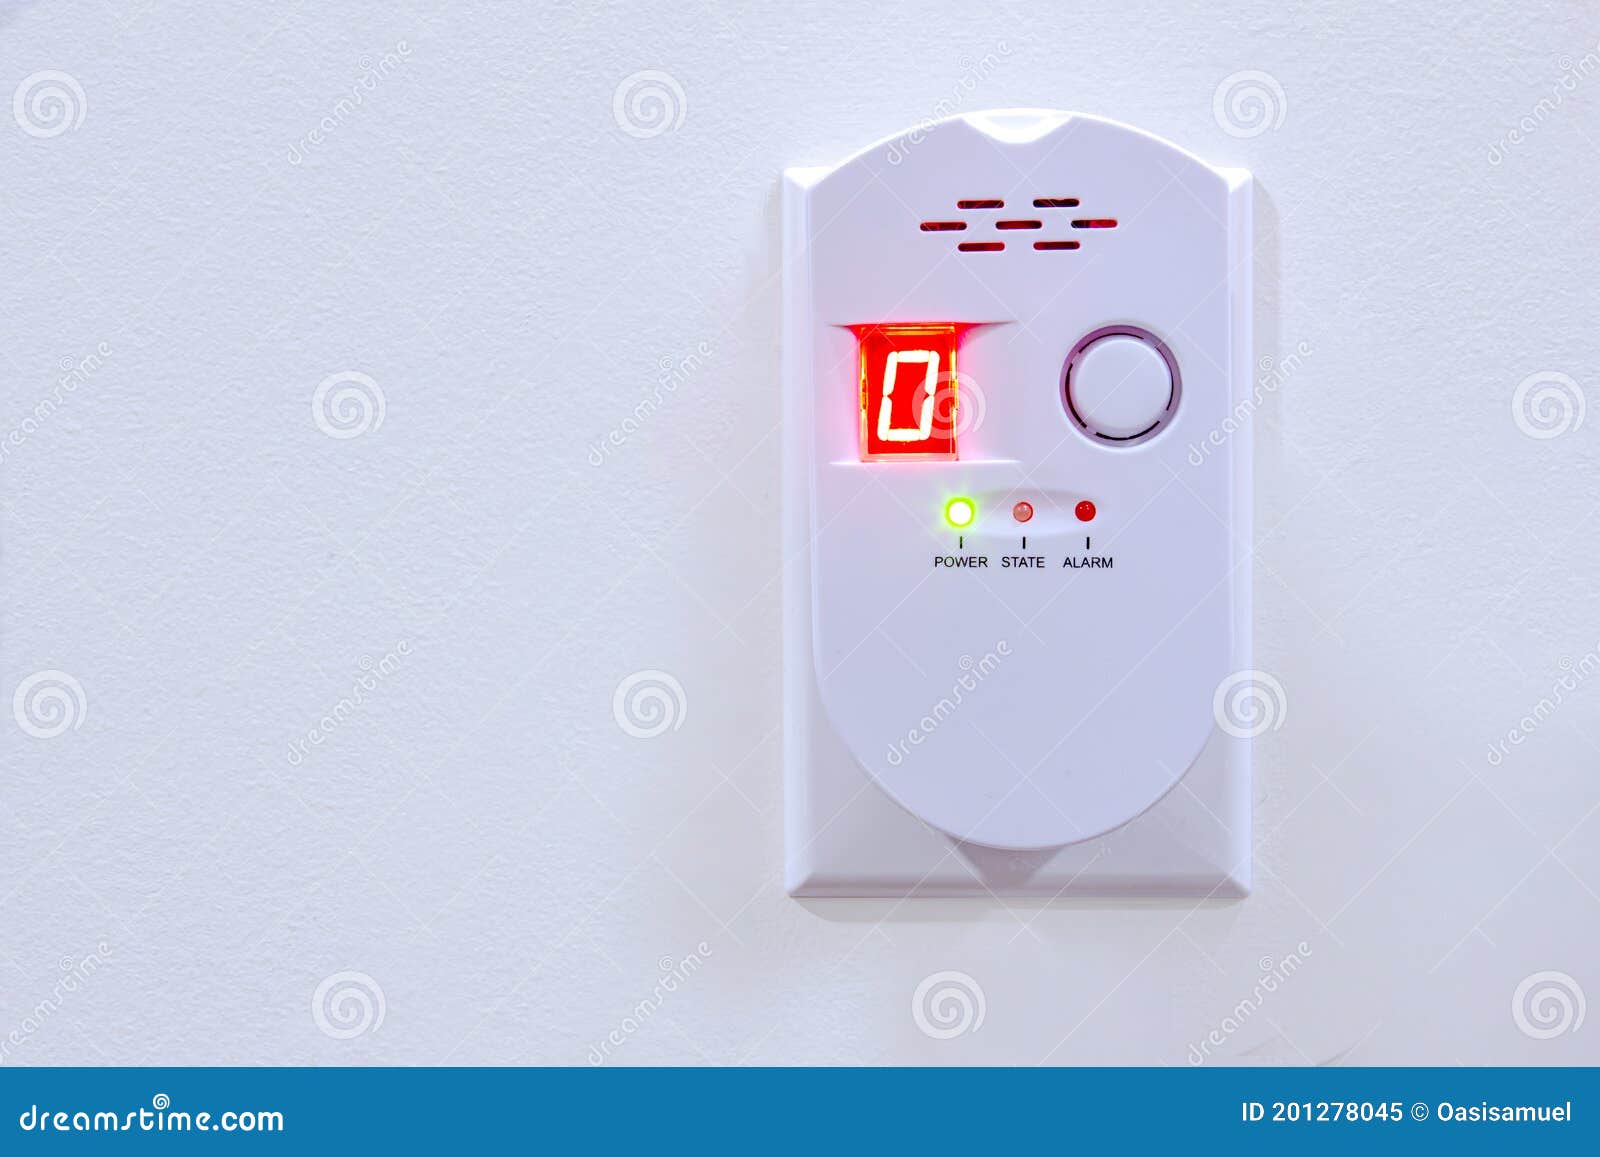 natural gas detector, gas alarm detector lpg gas leak sensor plug-in gas detector with sound warning and led display